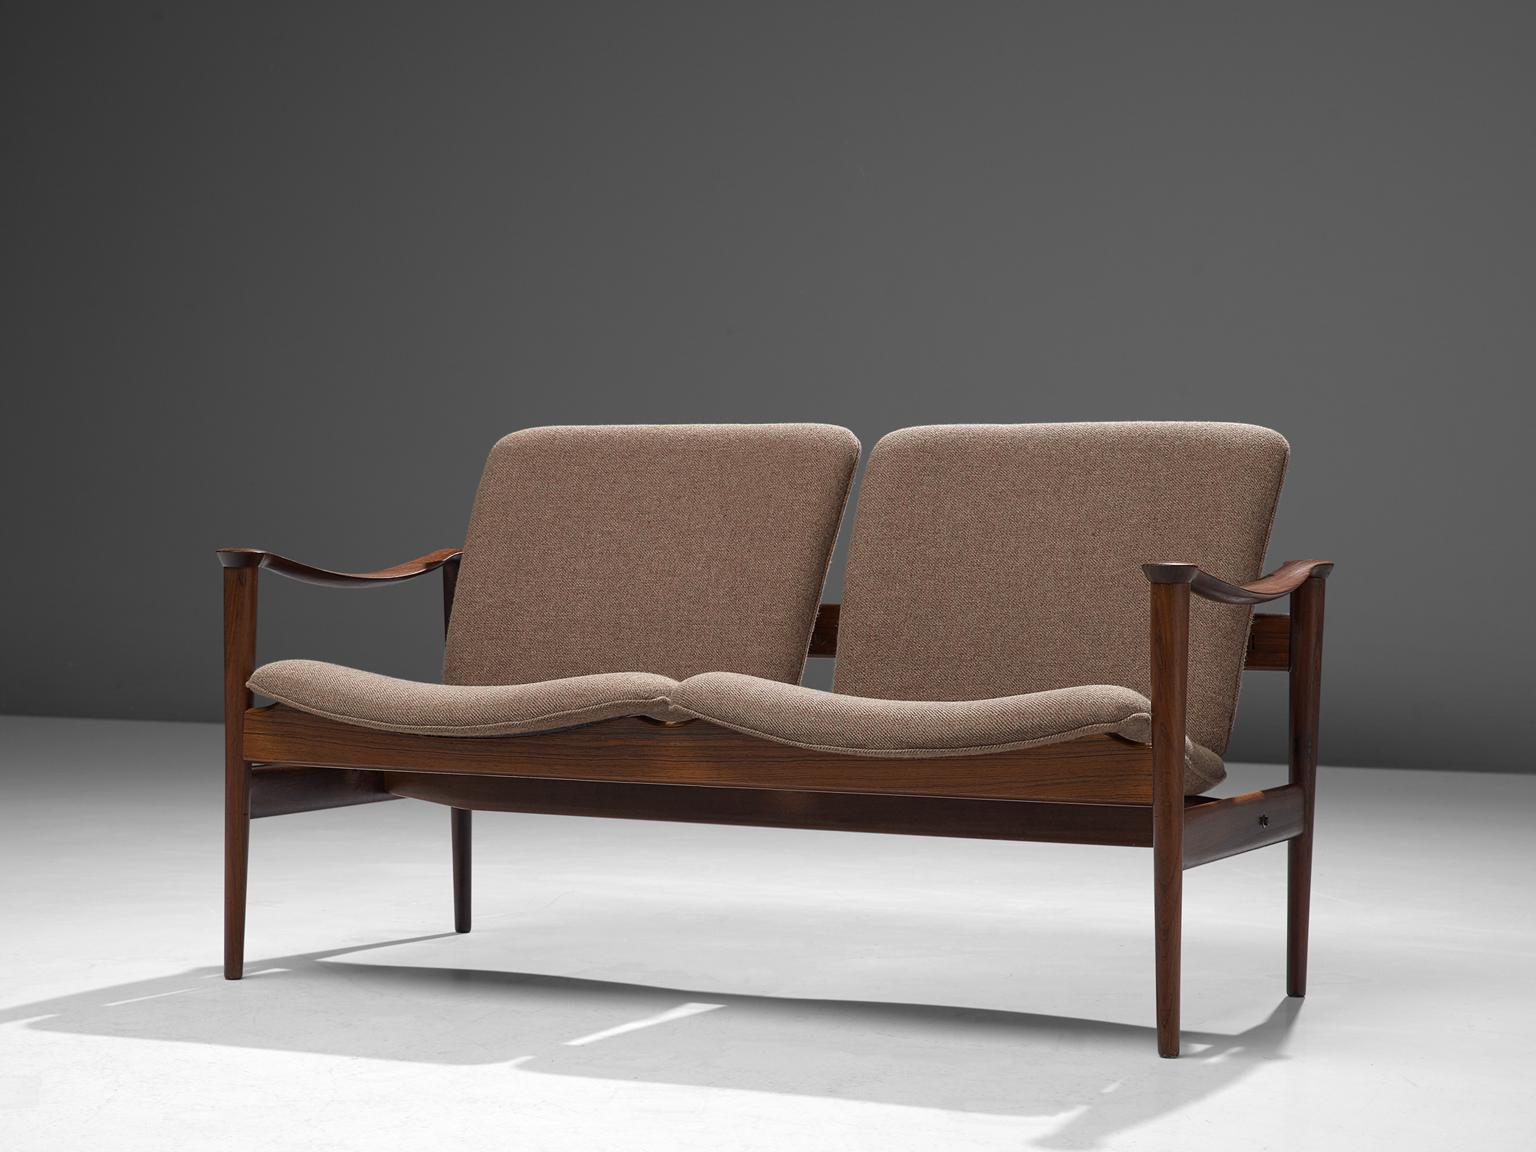 Fredrik A. Kayser for Vatne Lenestolfabrikk, model 711 sofa, rosewood and taupe/brown fabric, Norway, 1960.

This settee is designed by Frederik A. Kayser and executed by Vatne Lenestolfabrikk. The sofa is executed in rosewood, leather and are